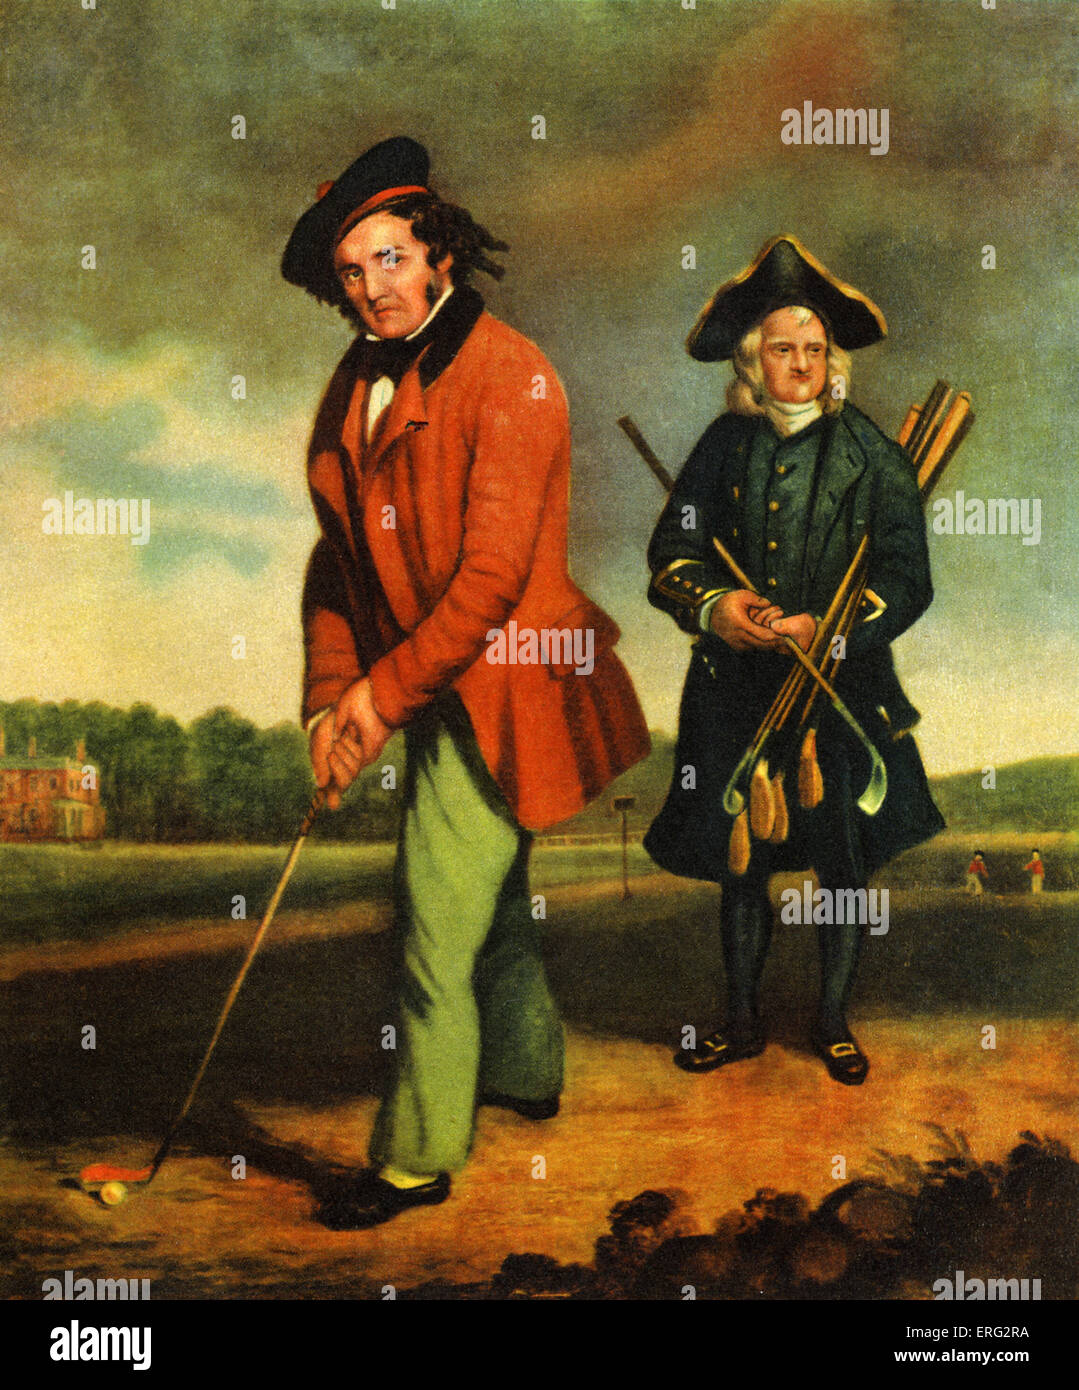 A gentleman golfing with his caddy. Artist not known. Stock Photo